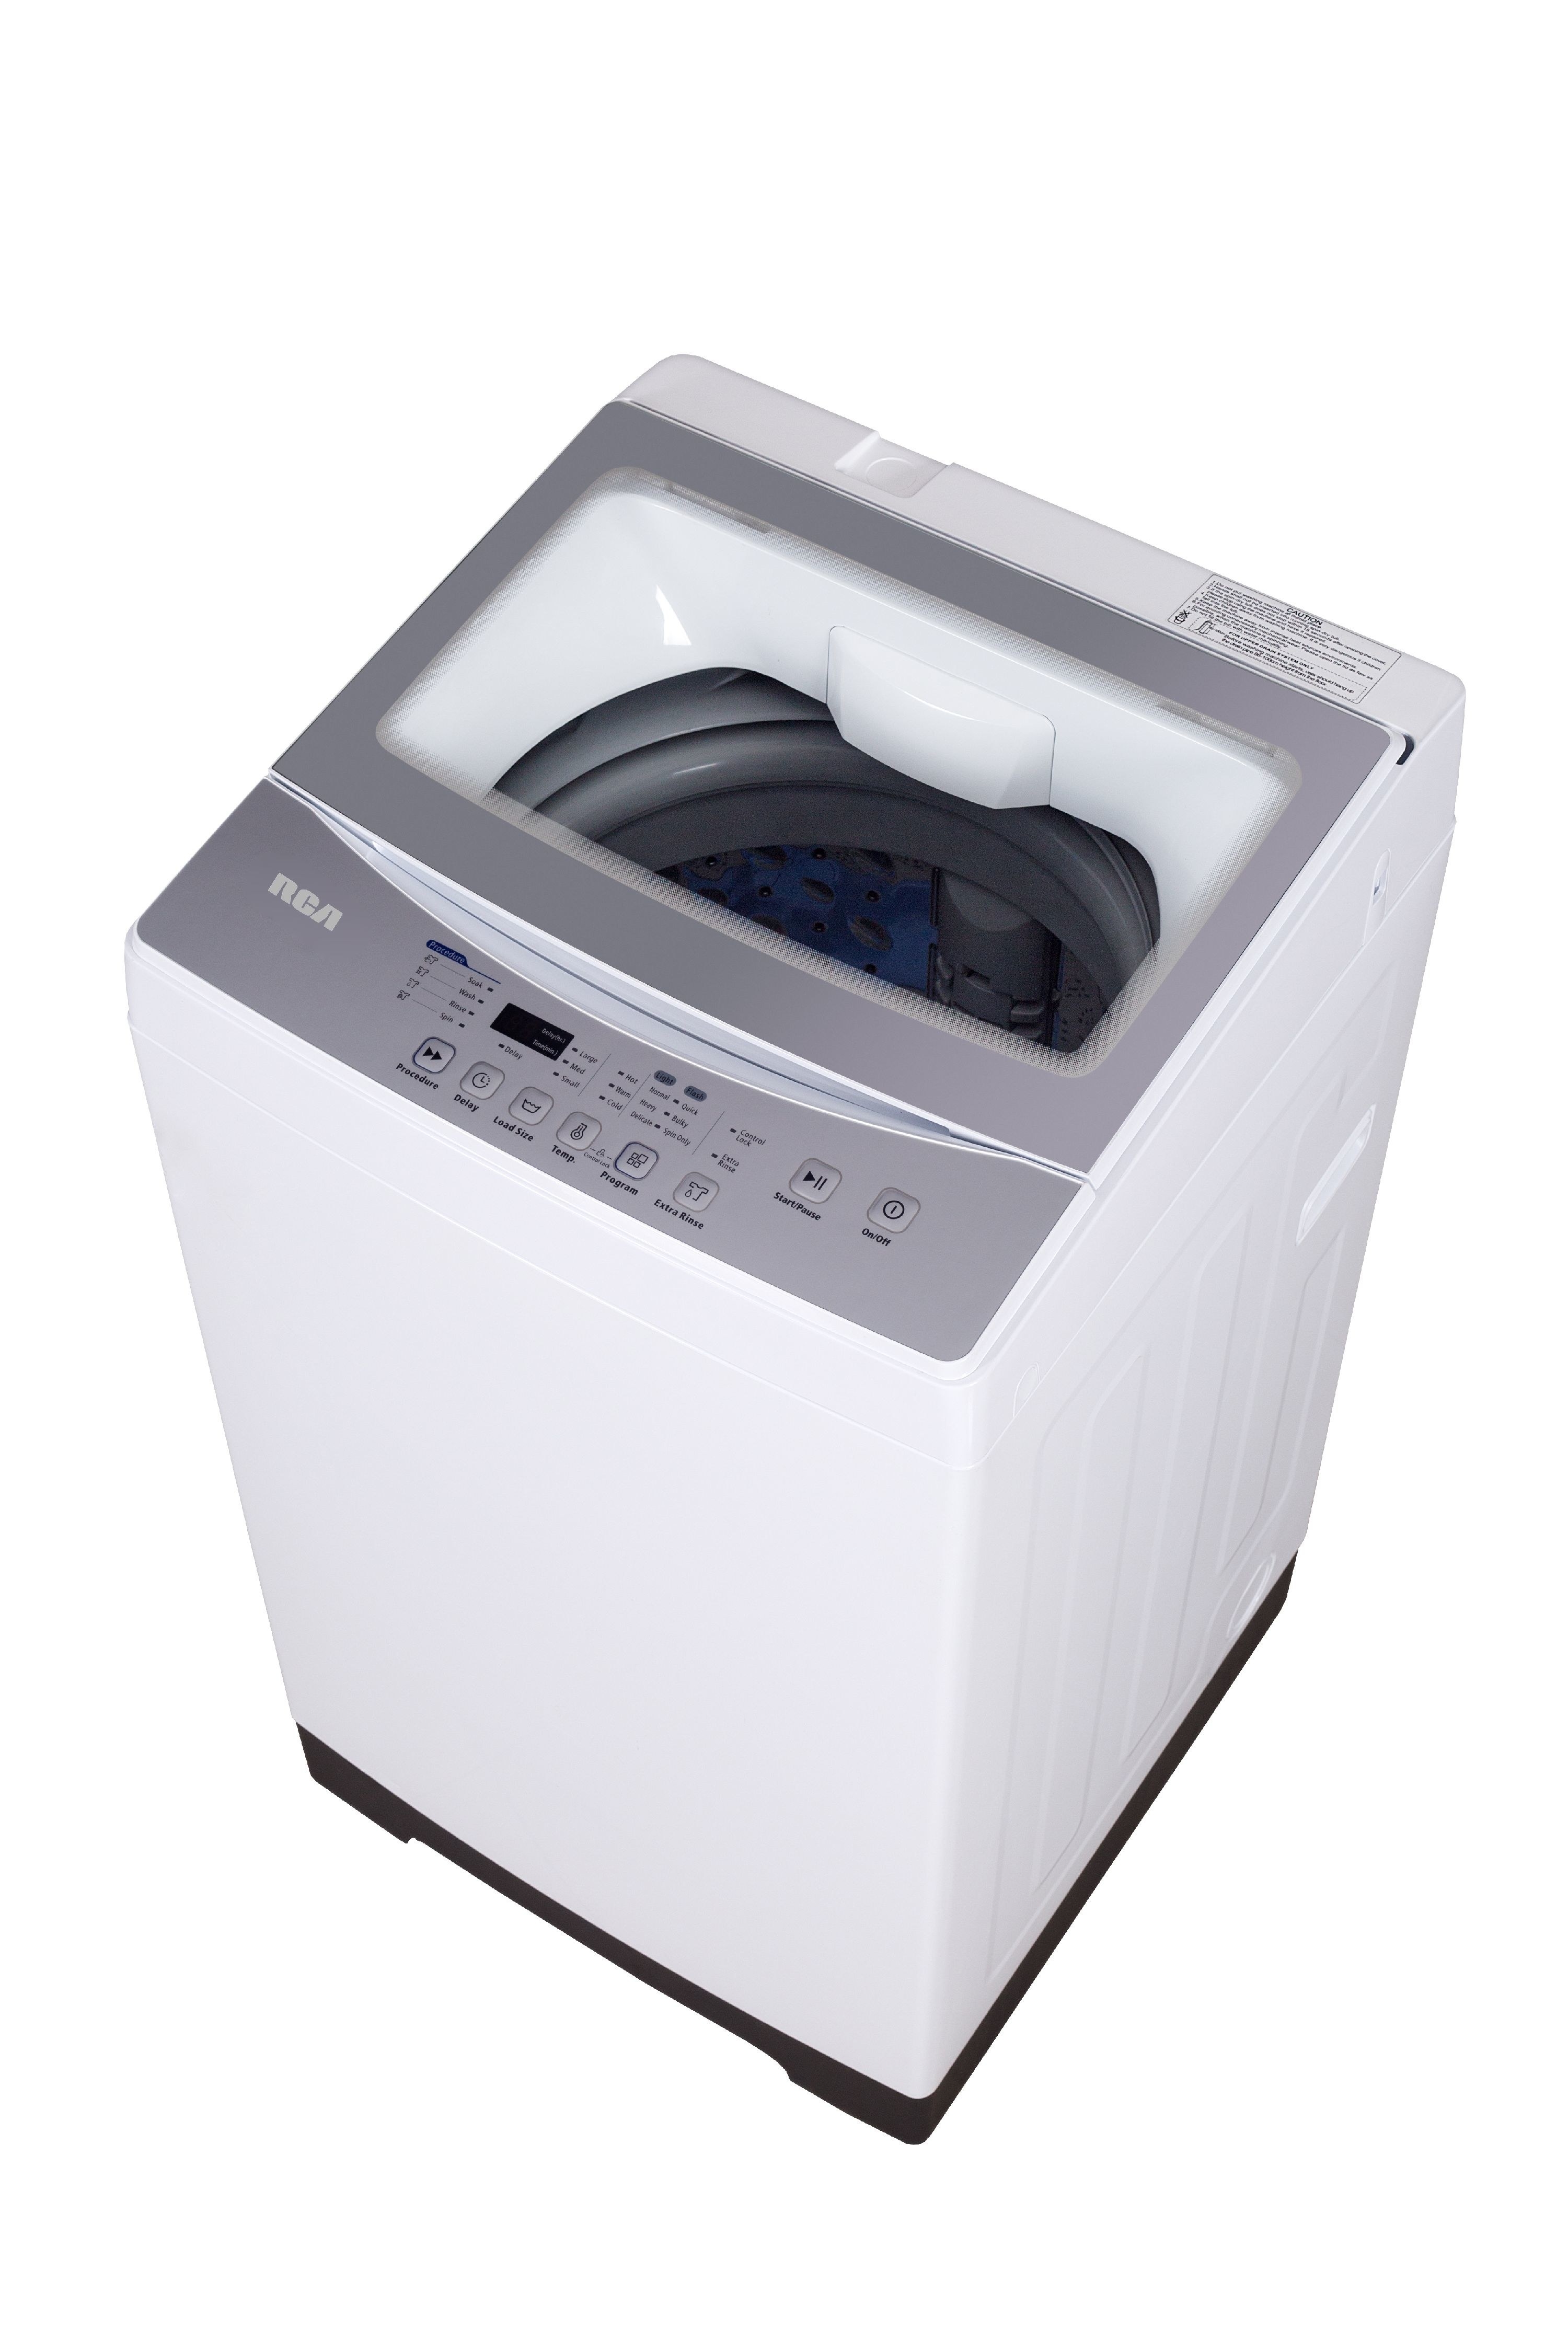 a white portable washing machine seen from the top